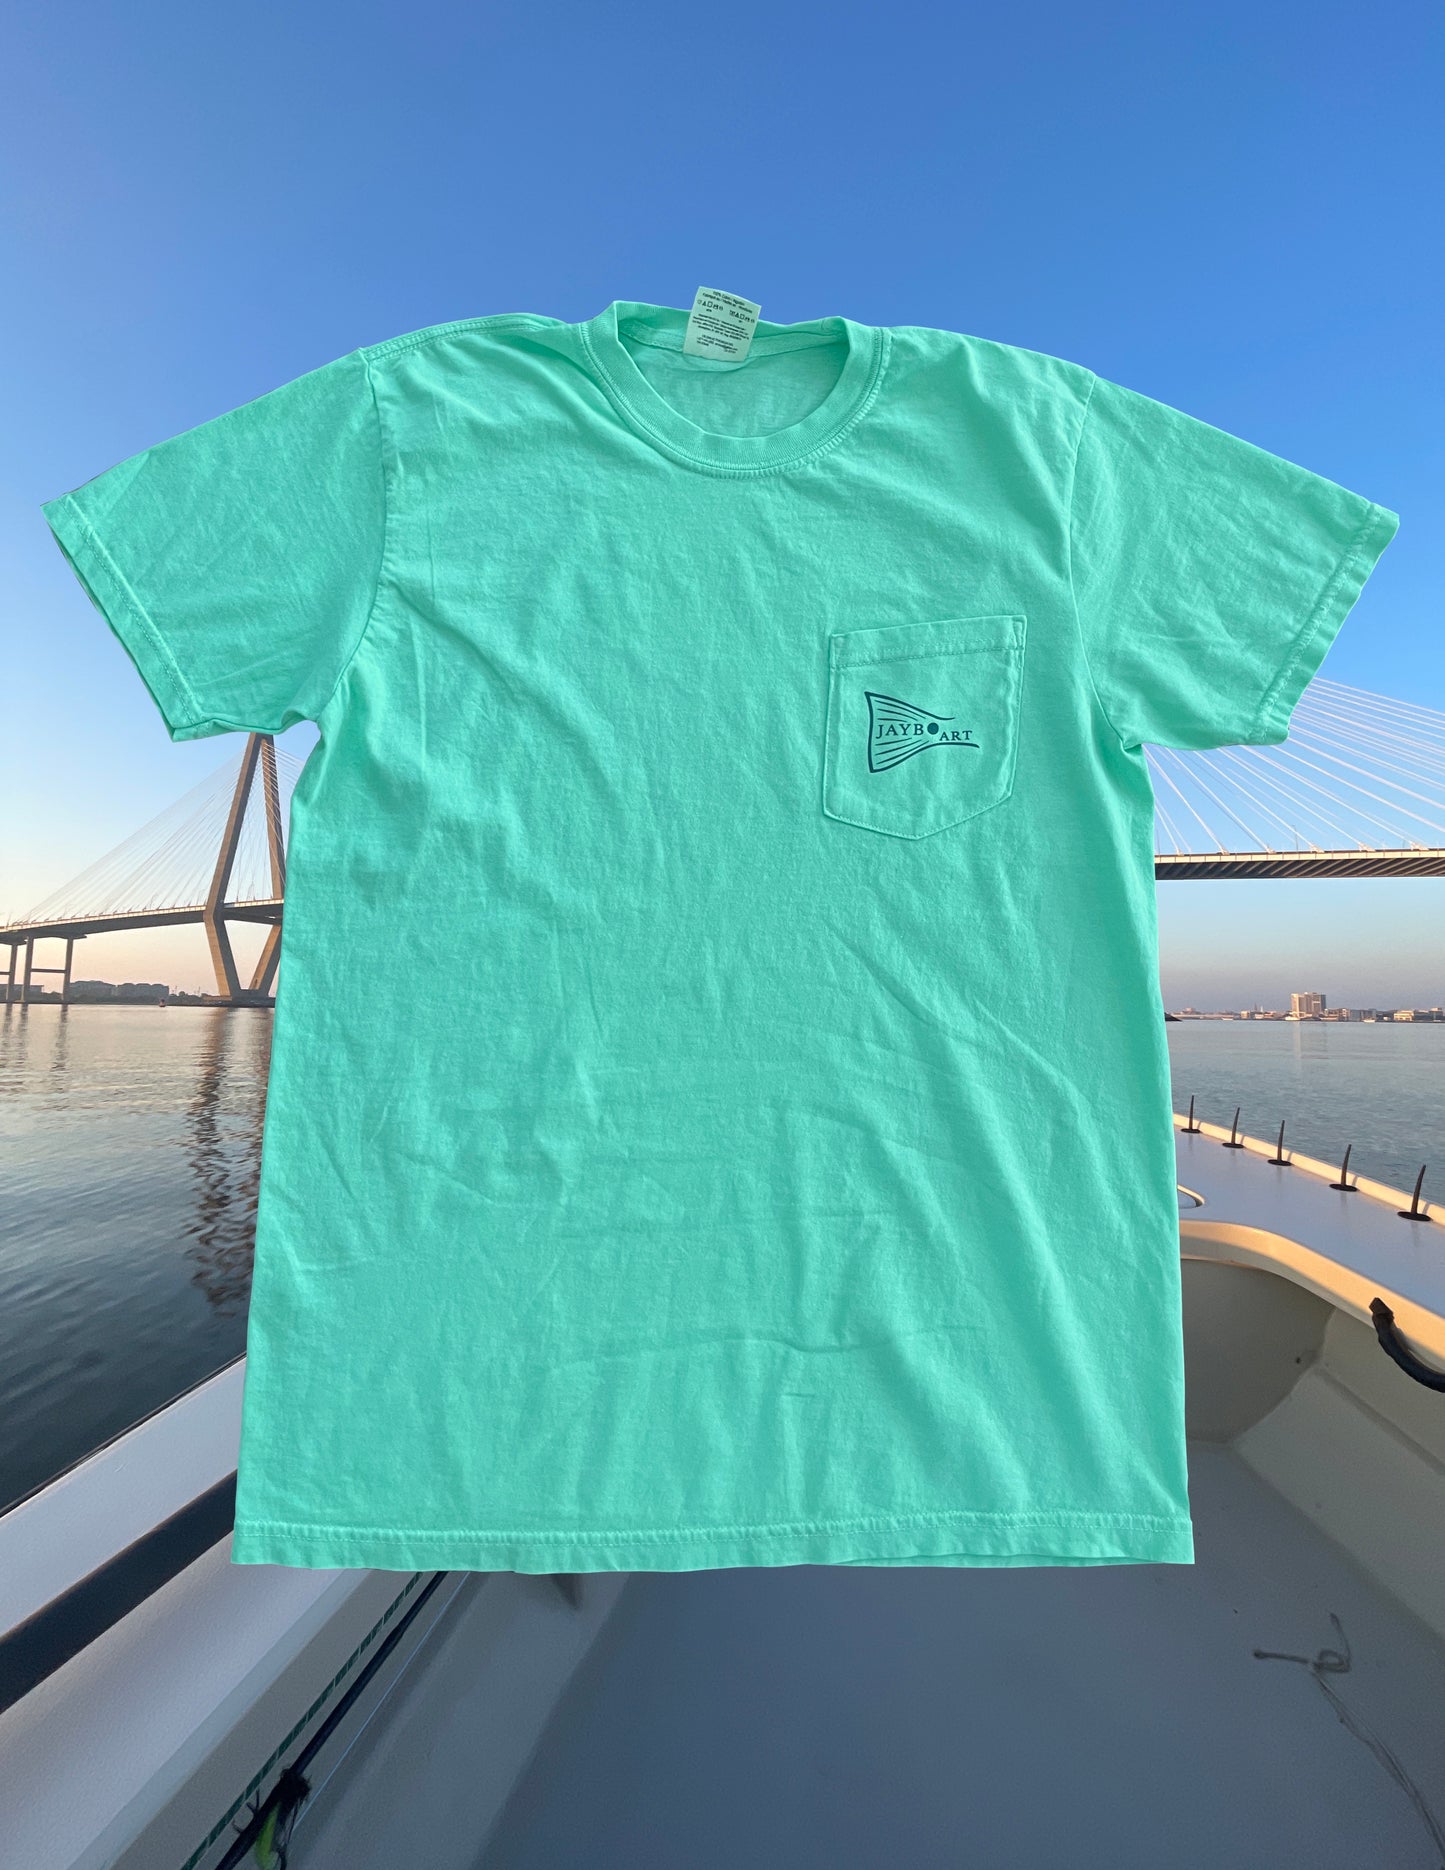 Get Off My Flat Blue Crab Comfort Color Pocket Tee: Limited Run!